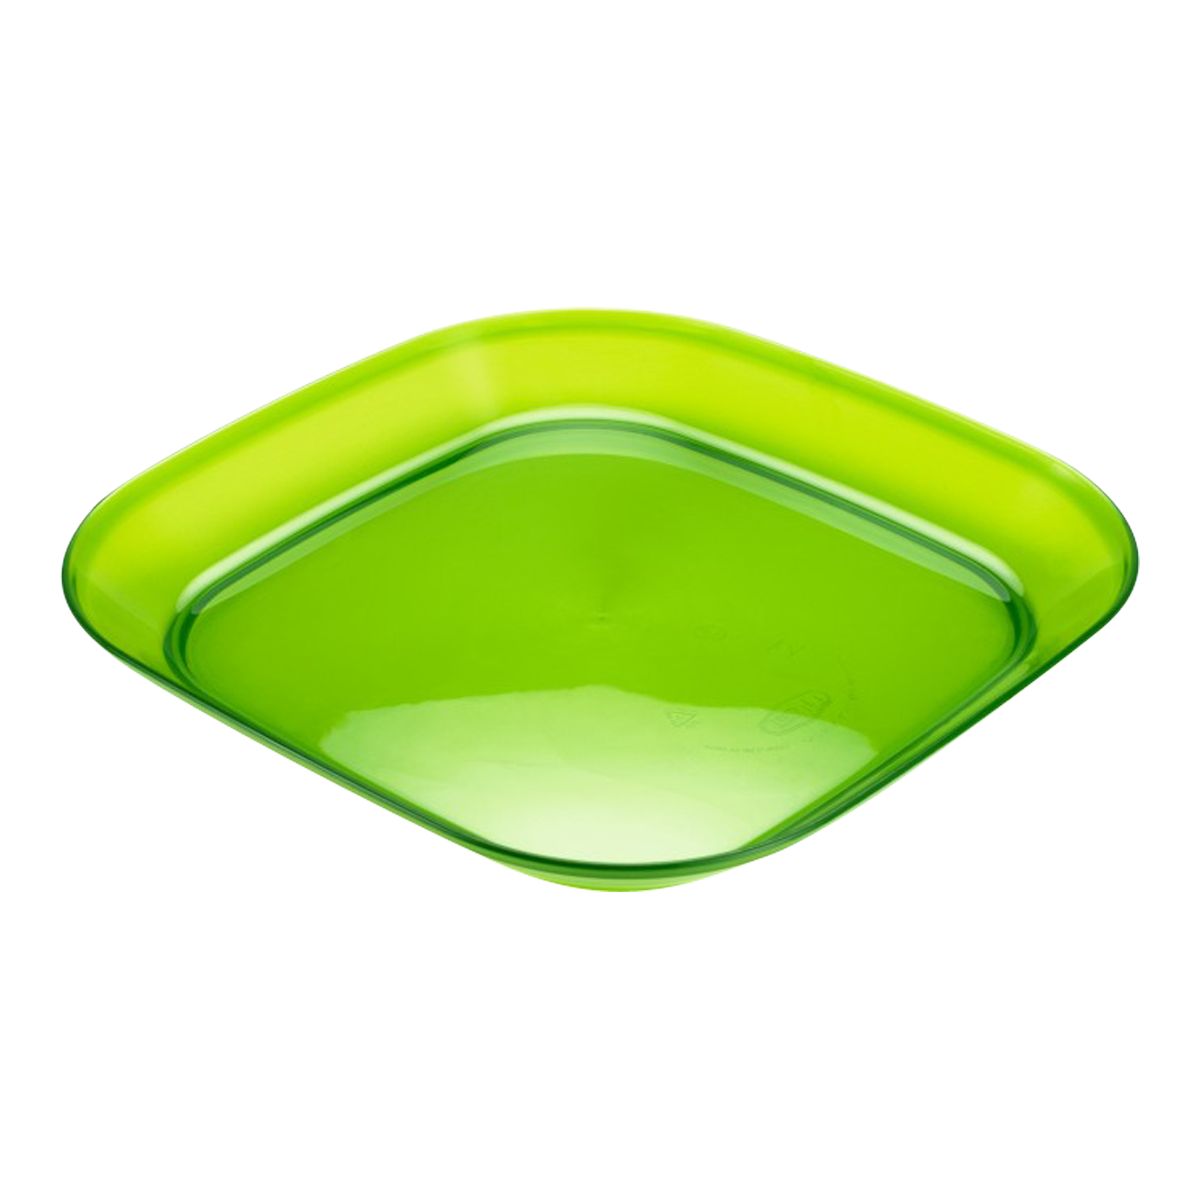 Image of GSI Infinity Plate - Green